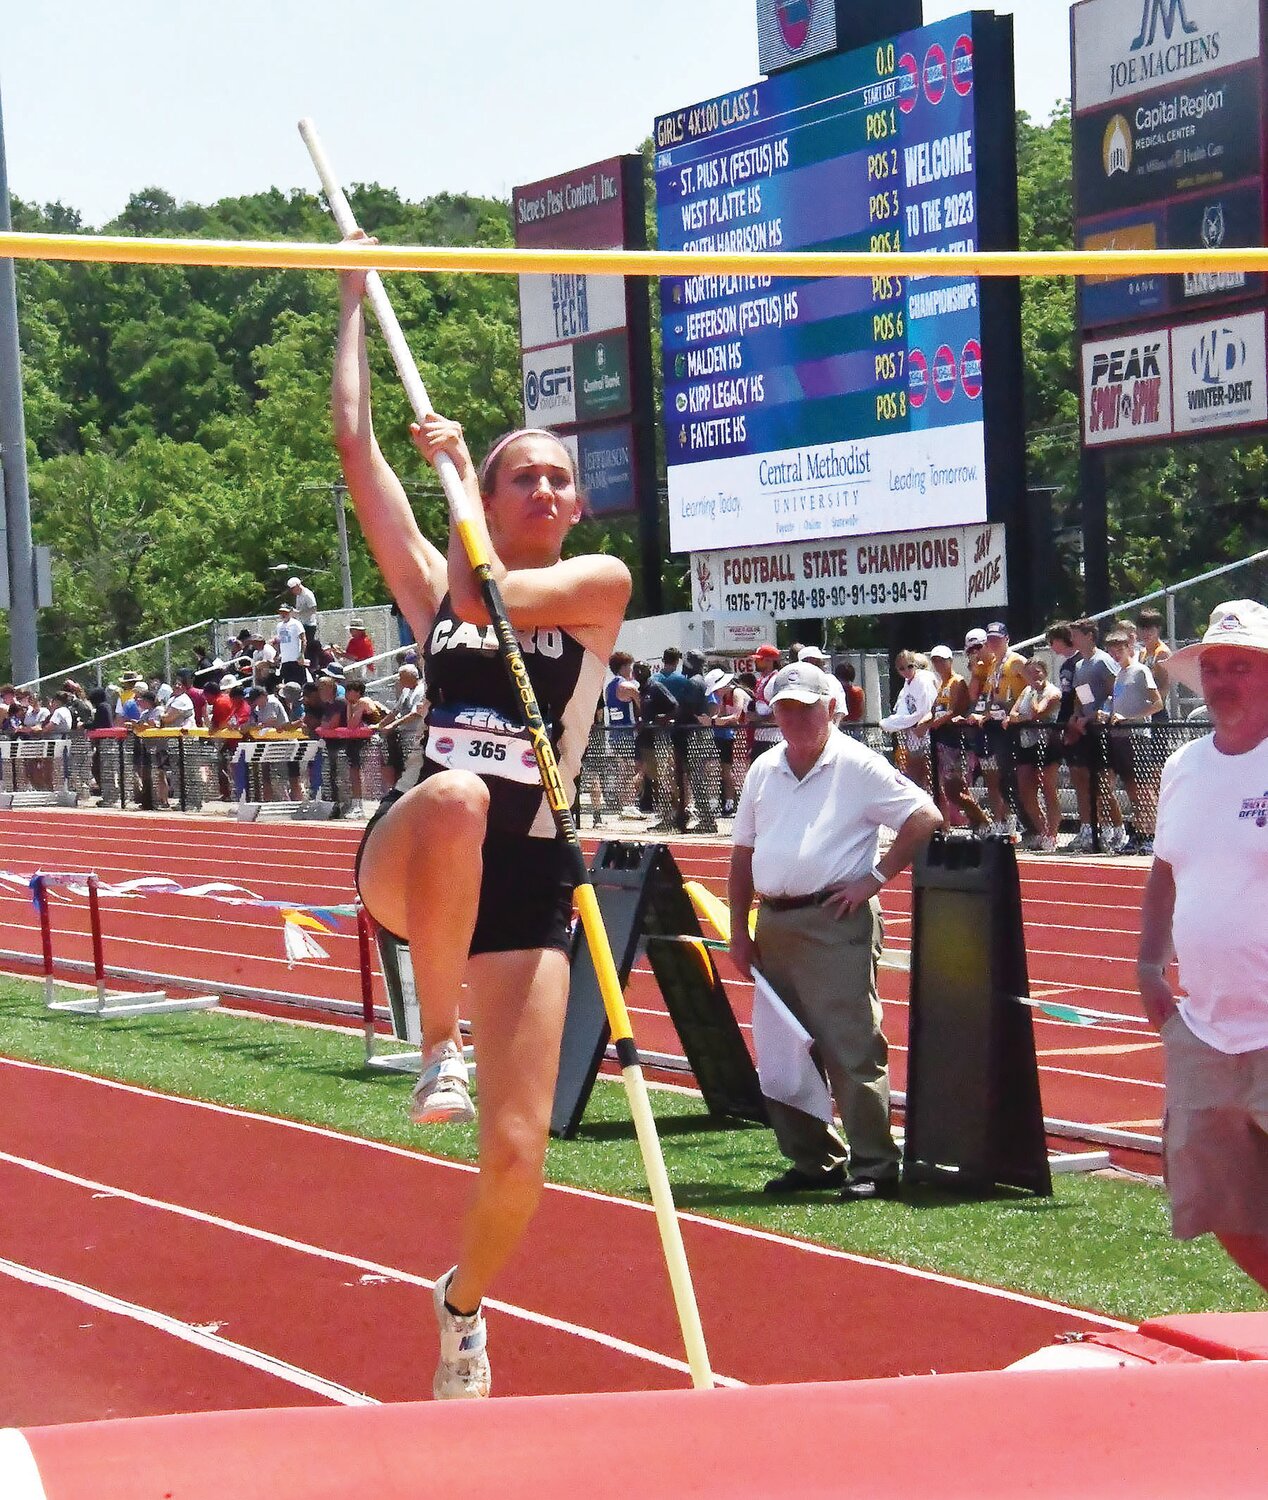 Cairo's Journey Sander competes in the Class 1 girls pole vault on Saturday, May 20, at Adkins Stadium in Jefferson City.